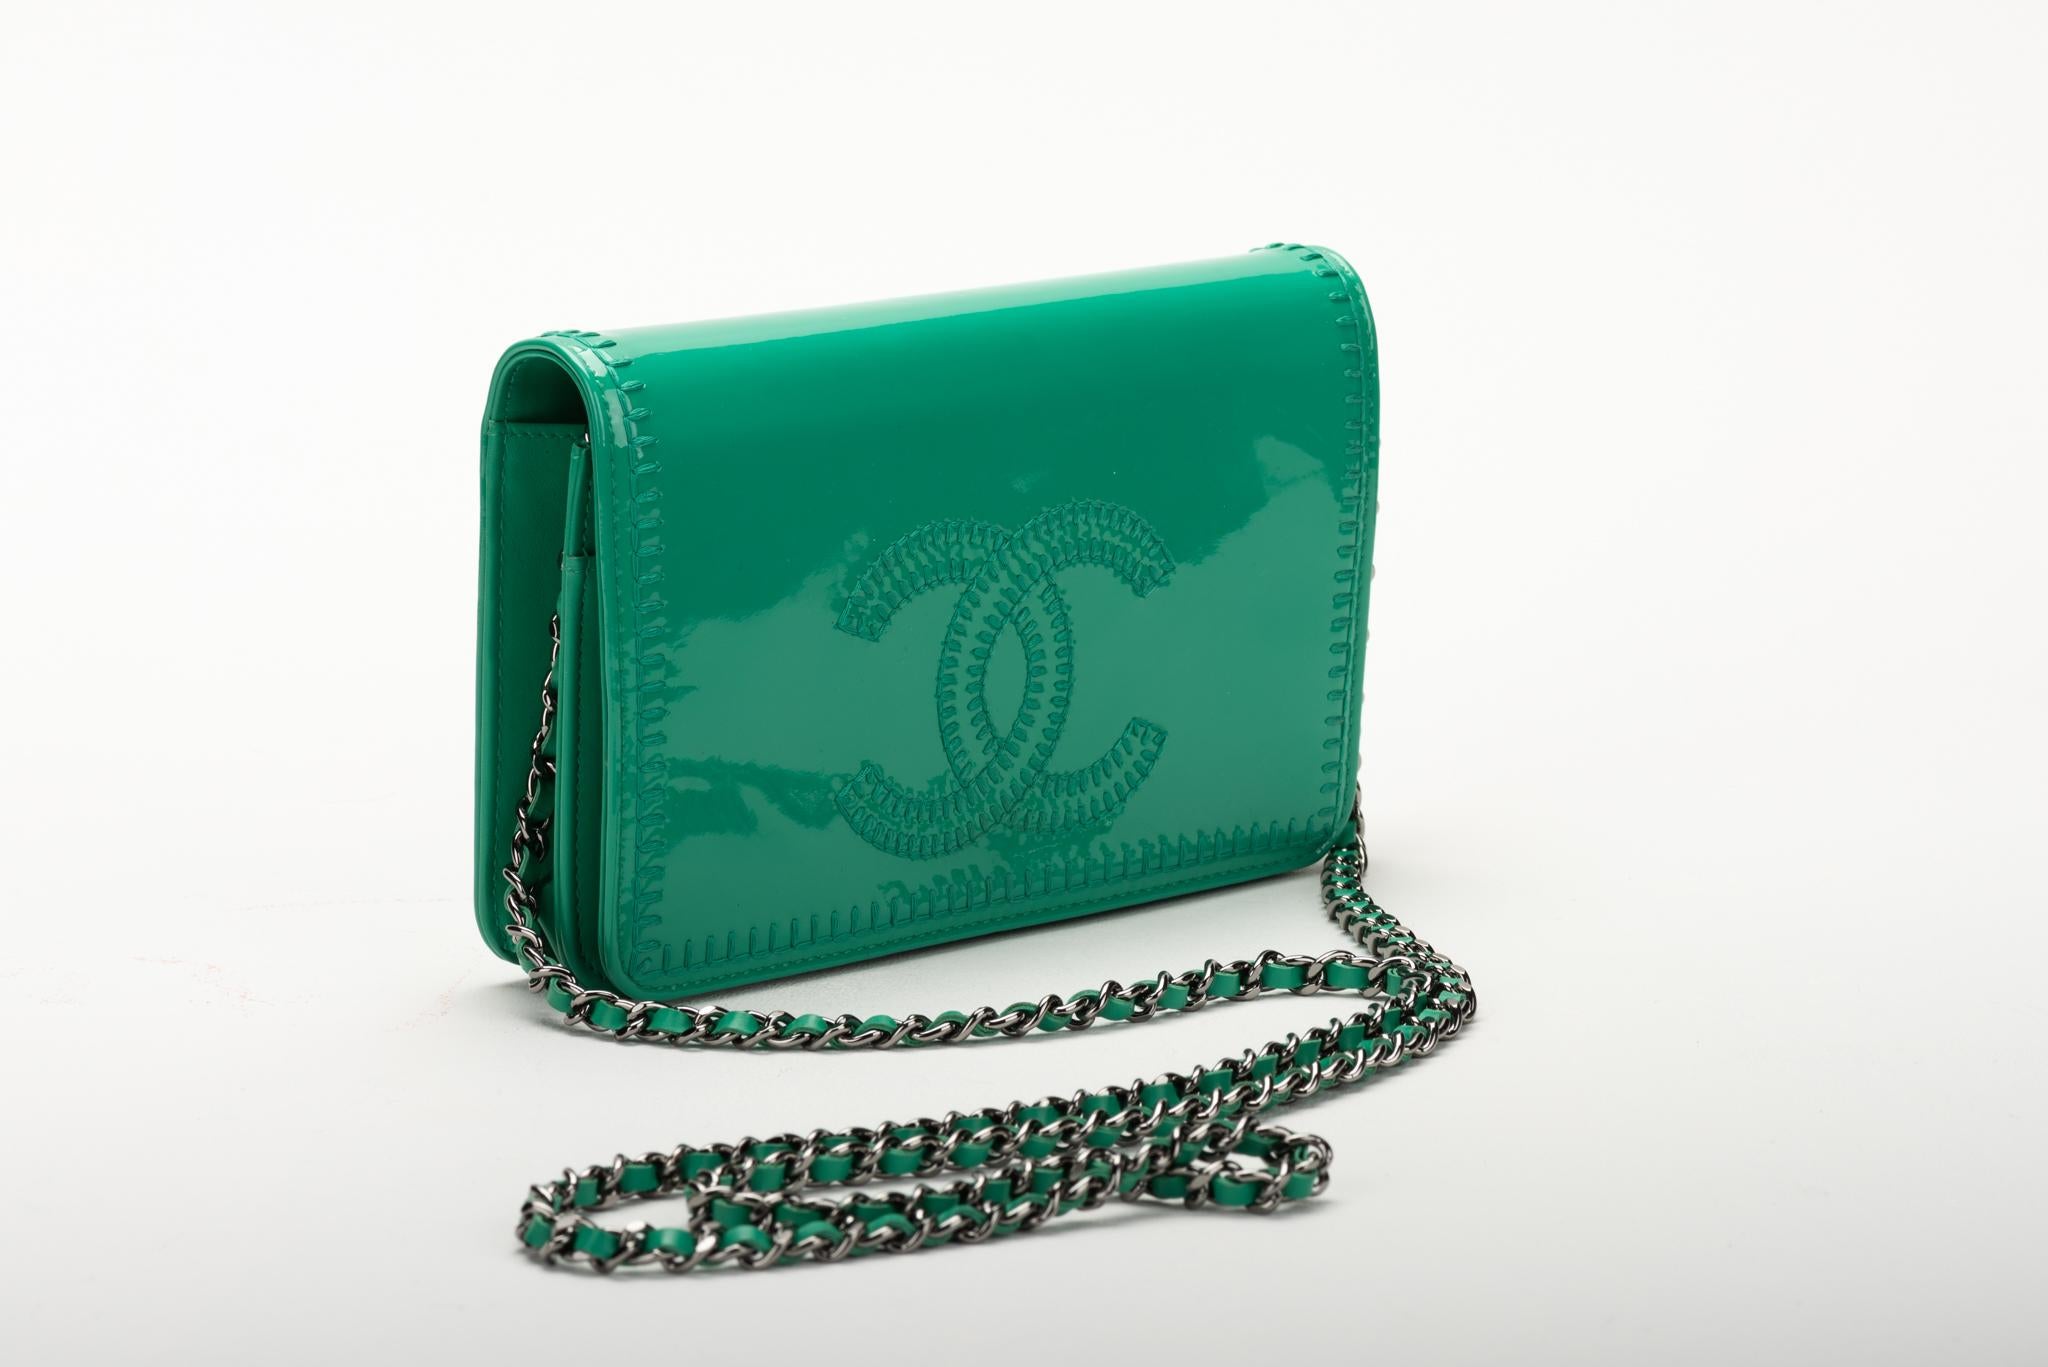 Chanel emerald green patent leather cross body wallet on a chain. Excellent condition. Comes with hologram and dust cover.